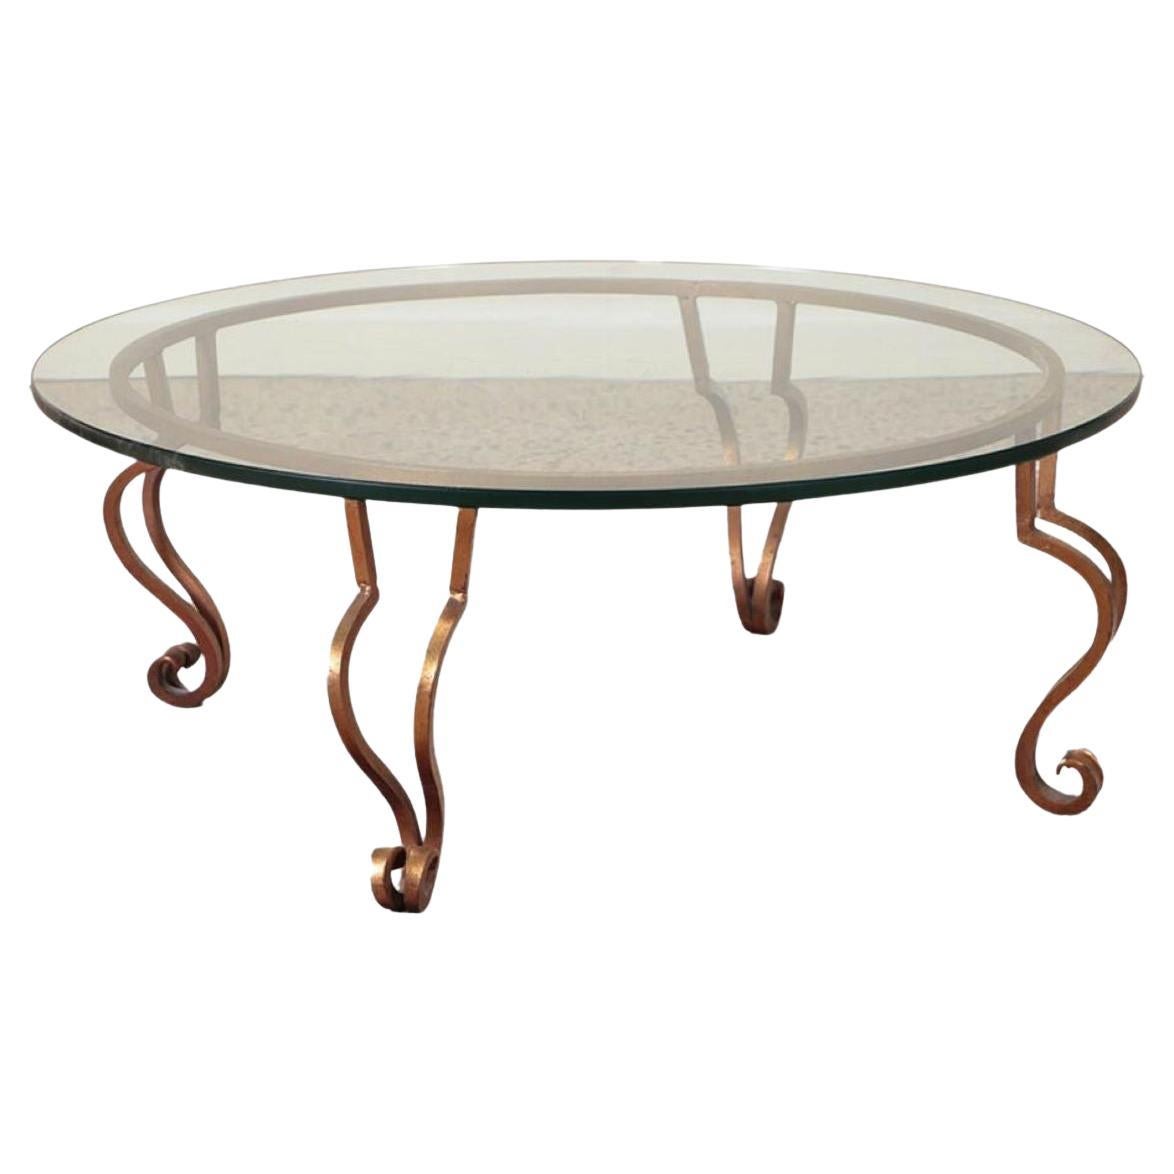 A gilt iron, glass top coffee table in the manner of Ramsay circa 1975. For Sale